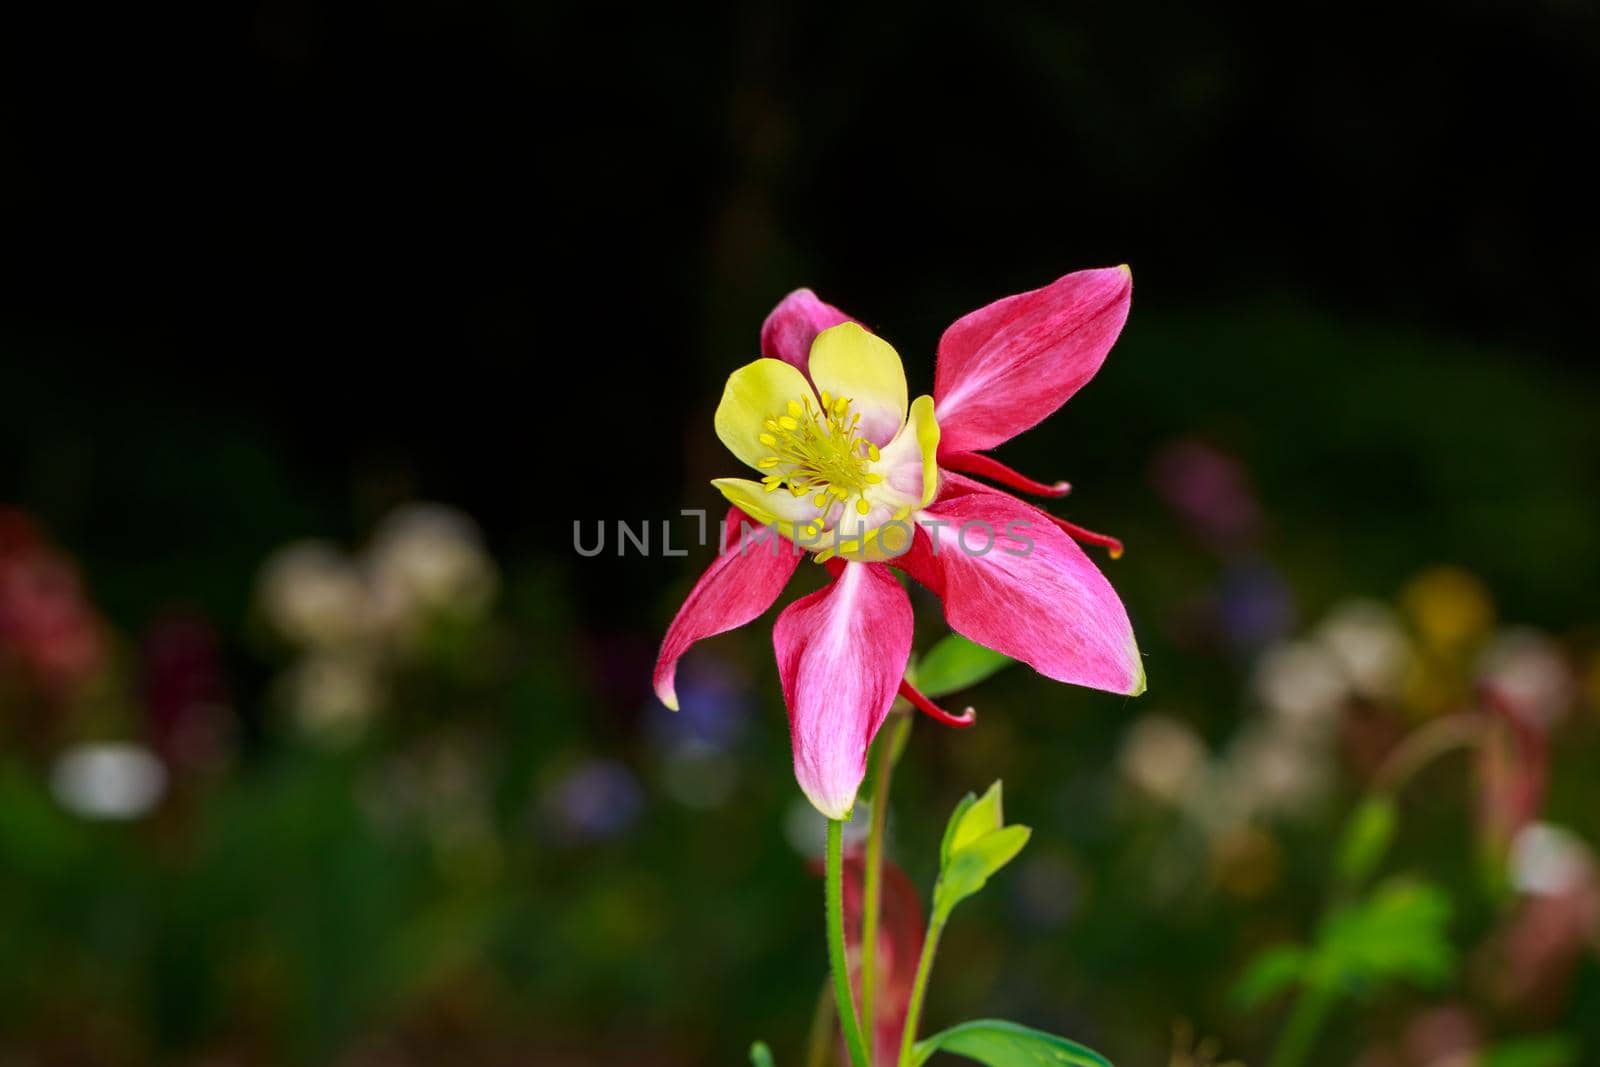 Aquilegia flower commonly known as columbine or granny's bonnet.